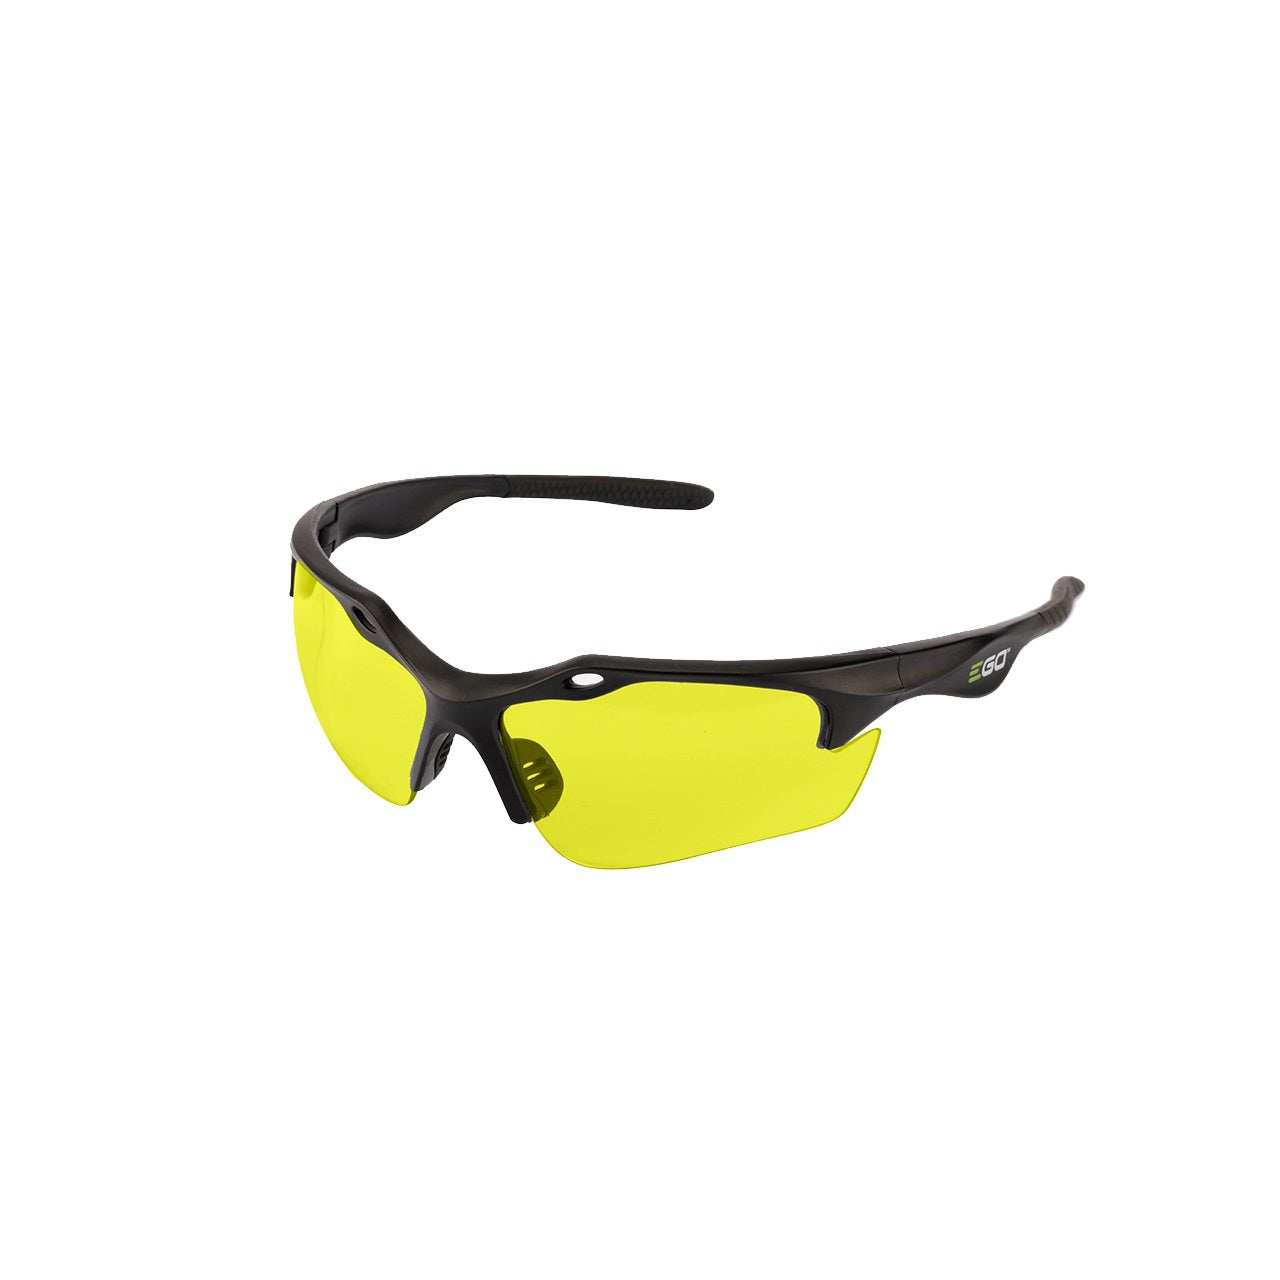 EGO GS003 Safety Glasses Yellow